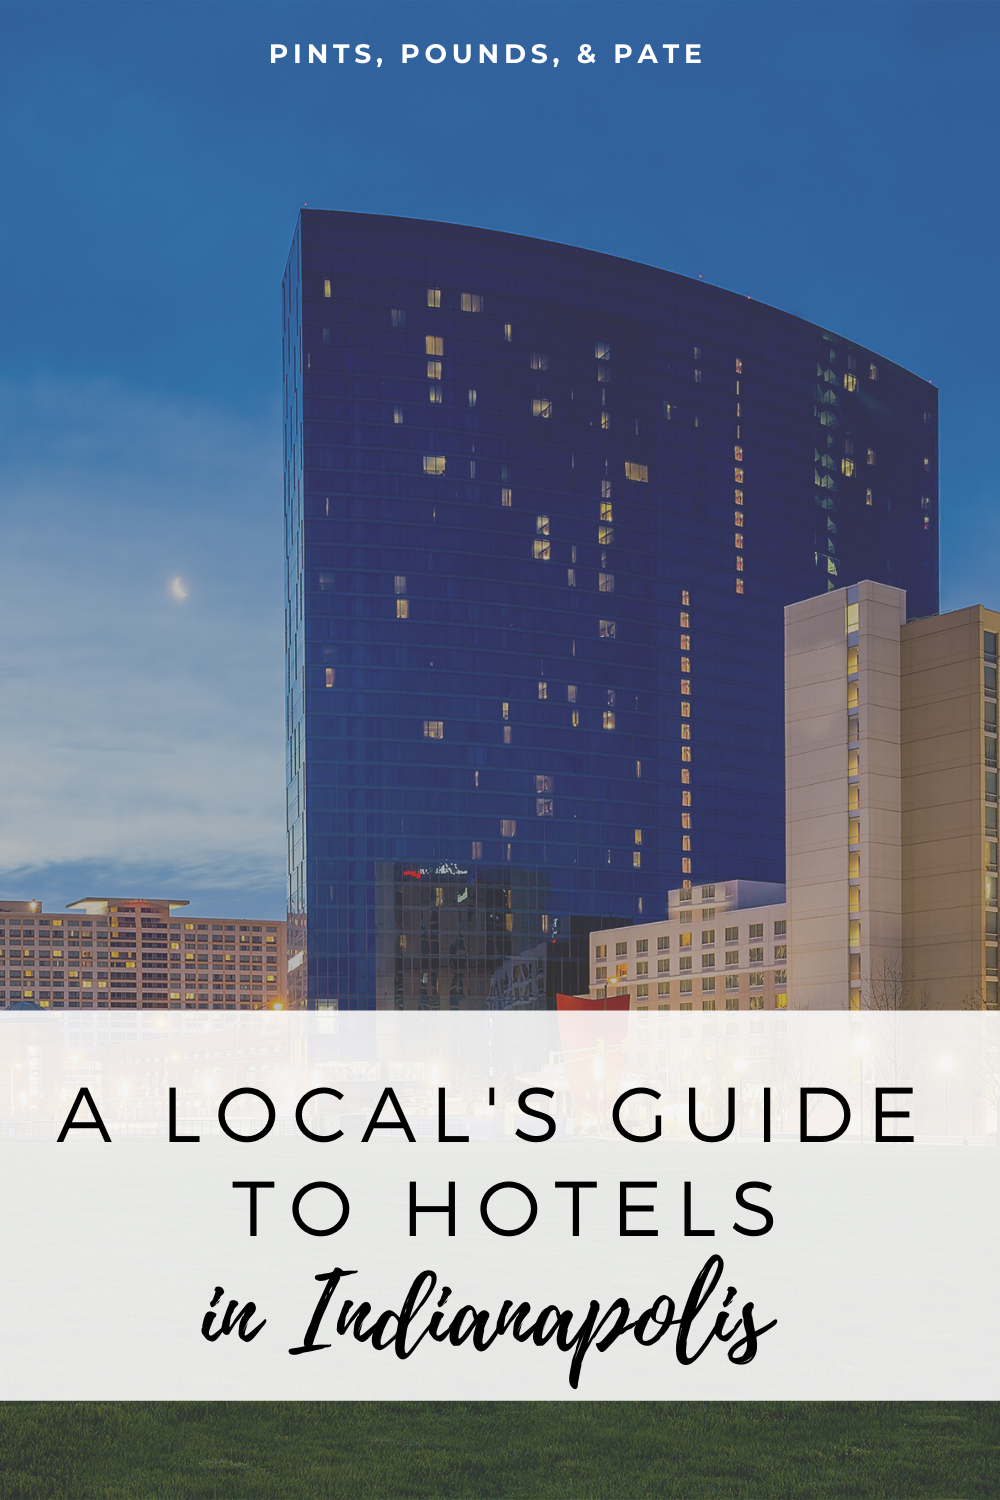 Best Hotels in Indianapolis